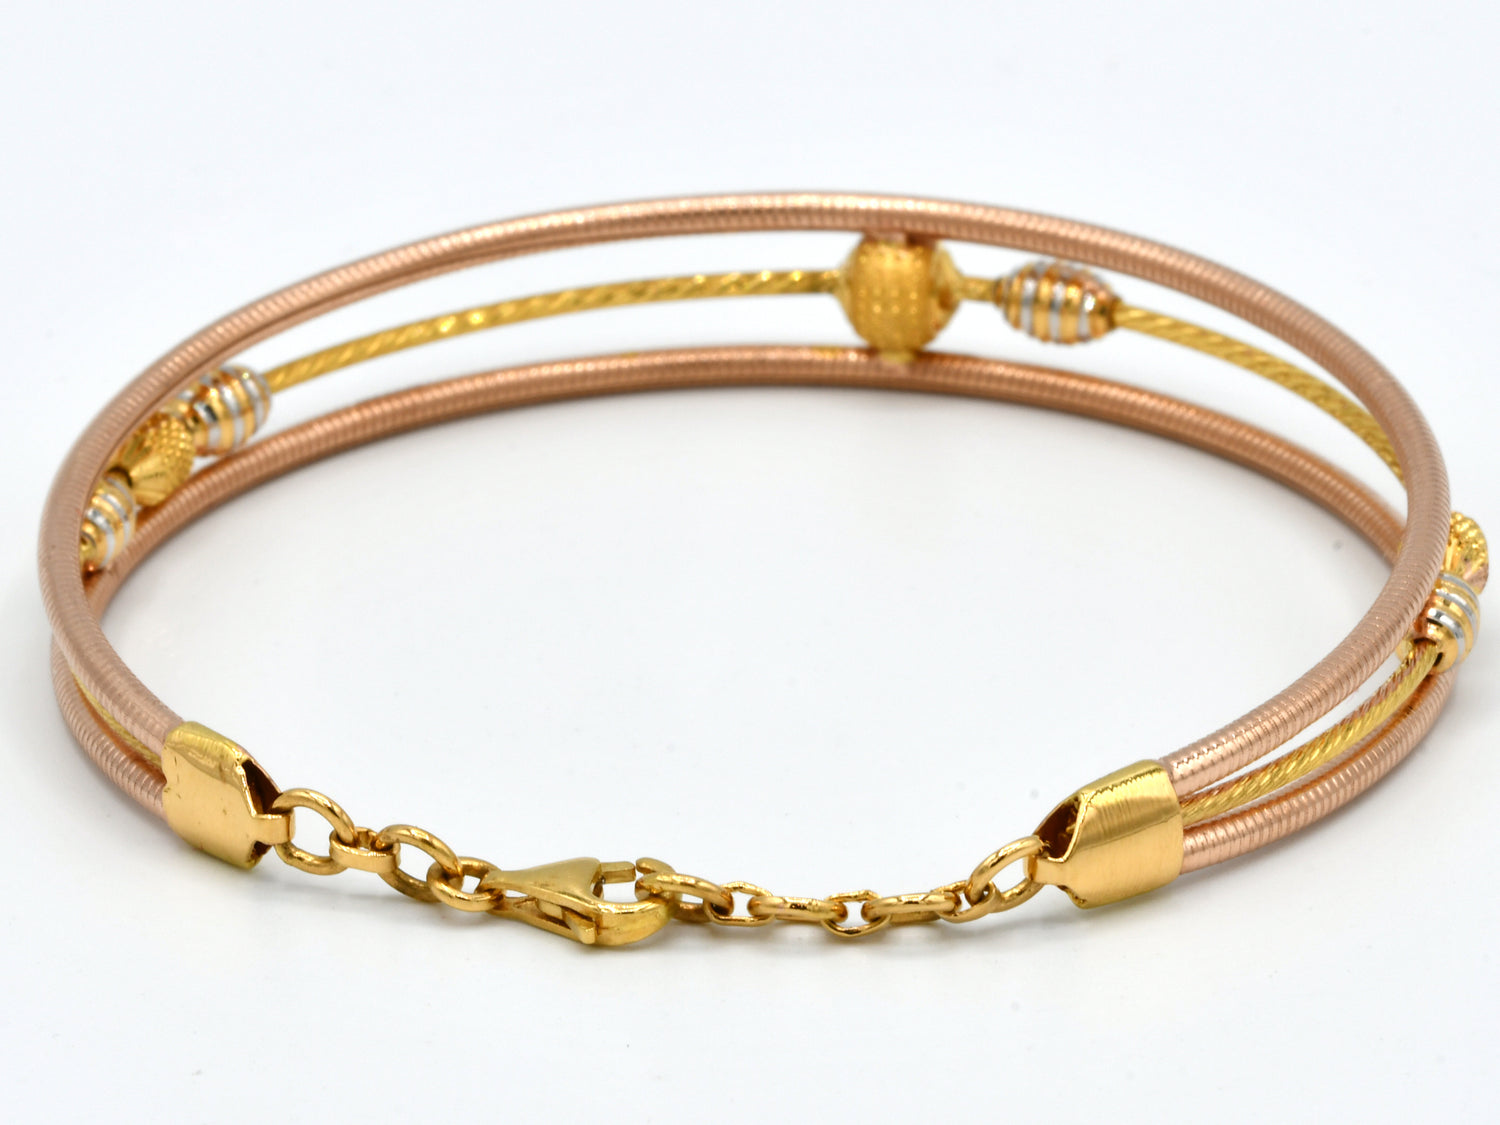 22ct Rose Gold Two Tone 1 Piece Bangle - Roop Darshan